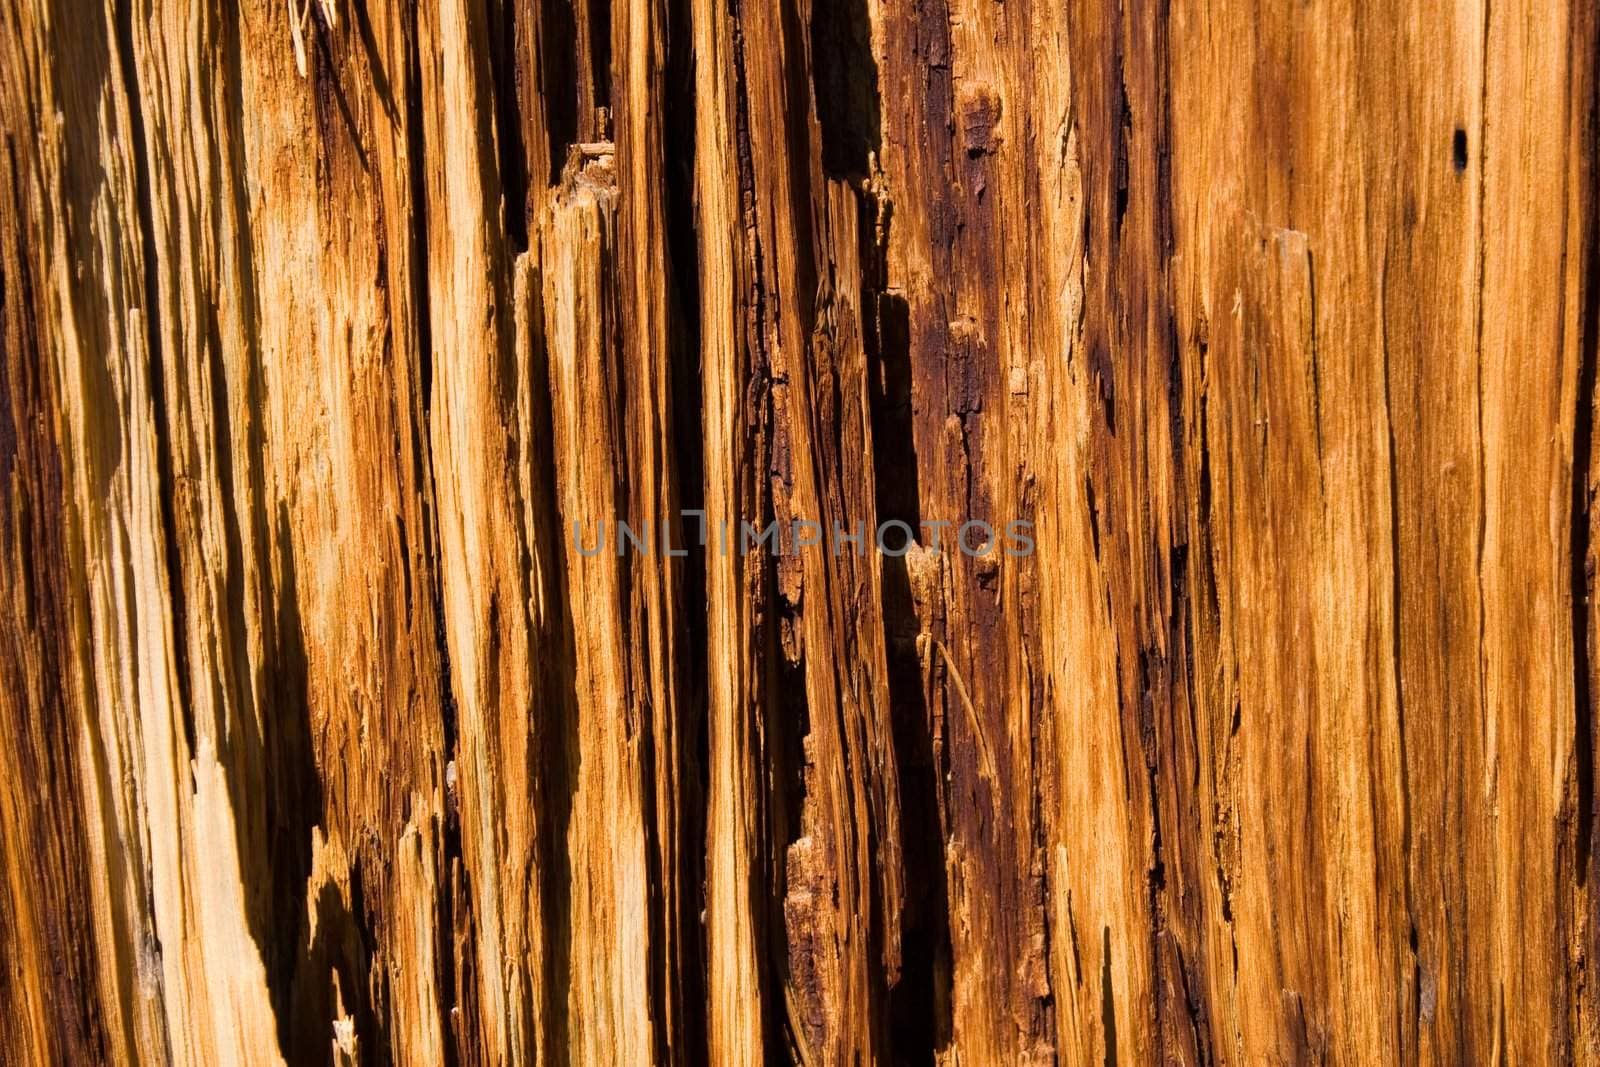 Close up of wood grain of decaying tree